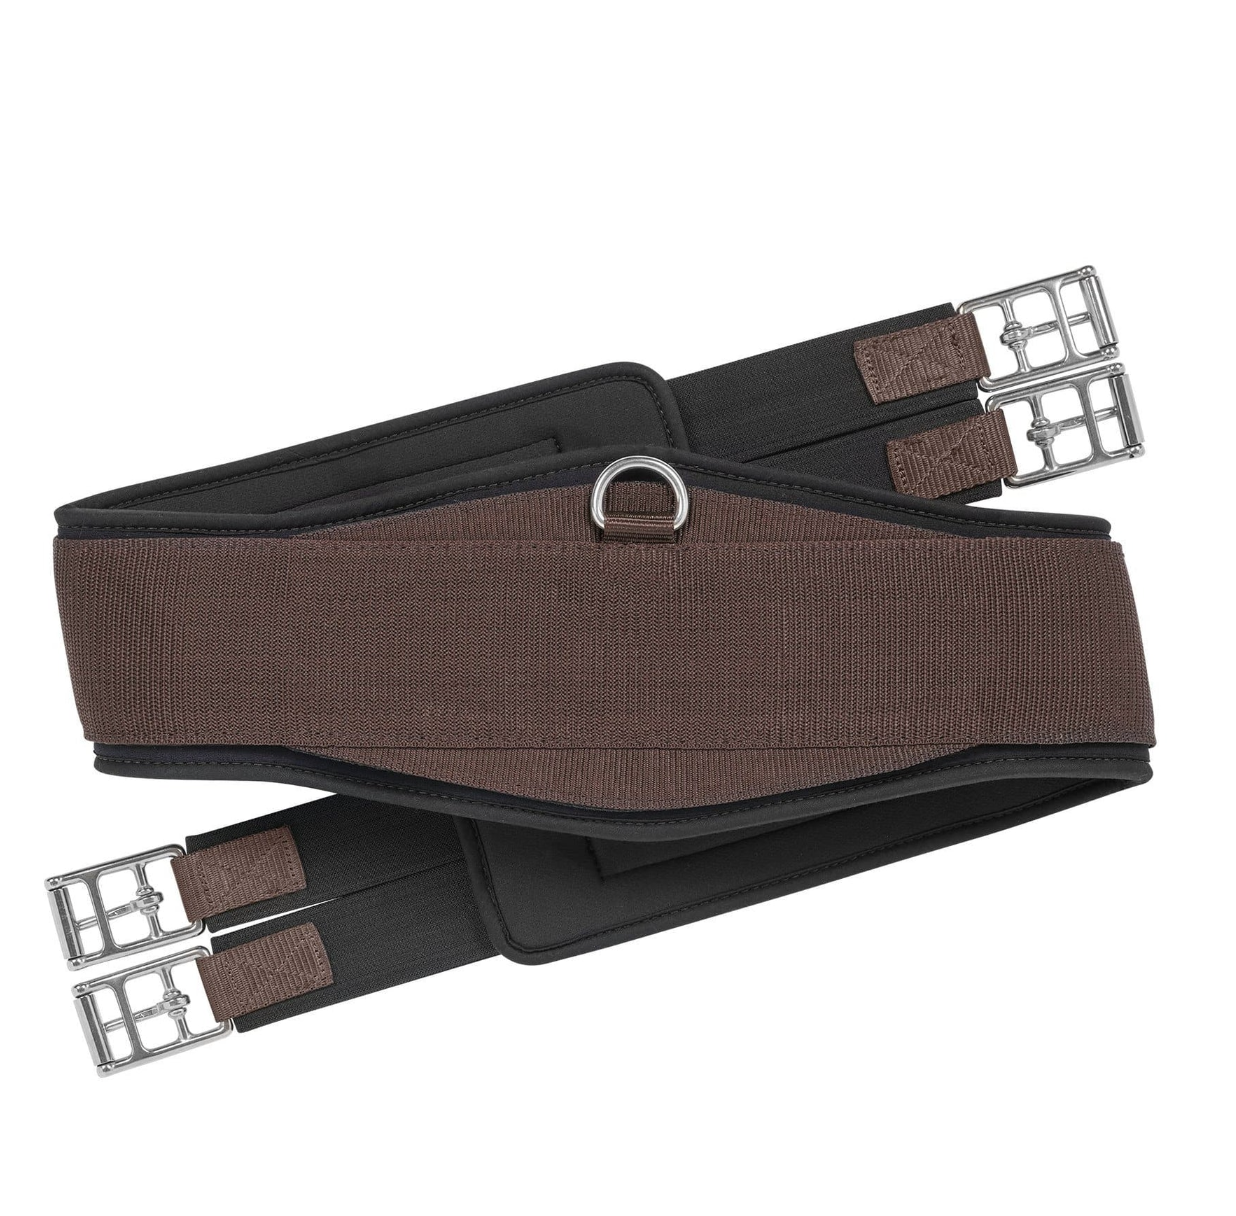 Equifit Essential Schooling Girth